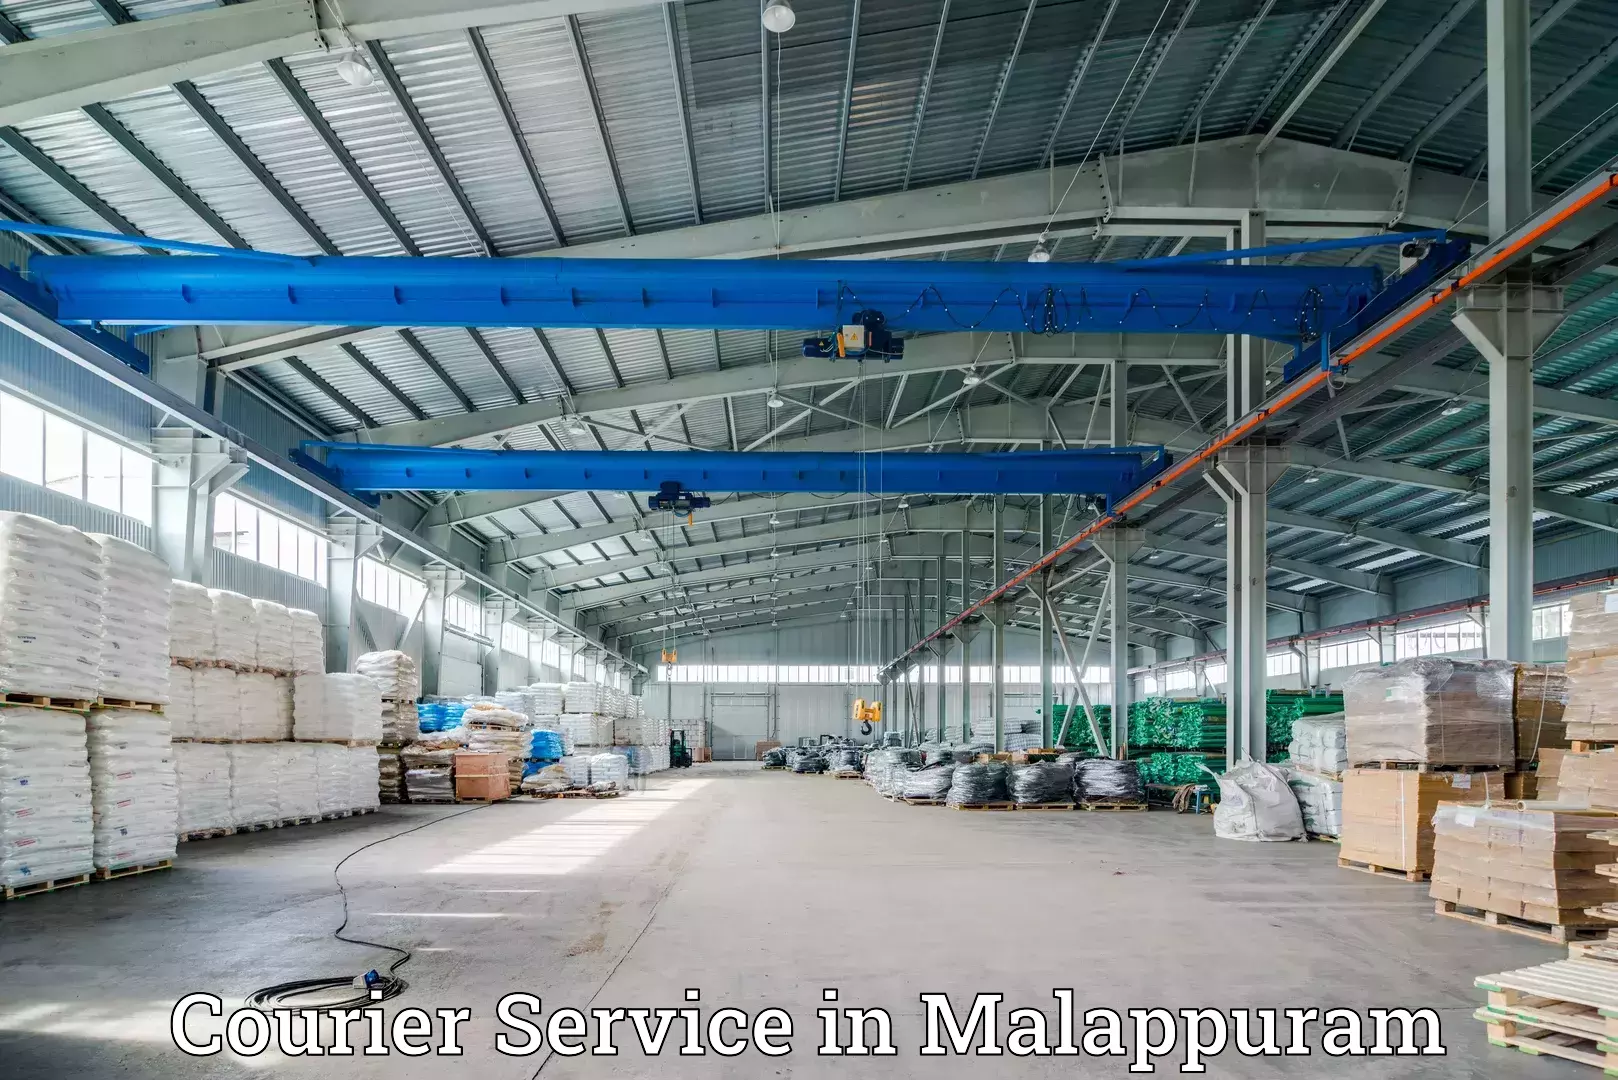 Express mail solutions in Malappuram